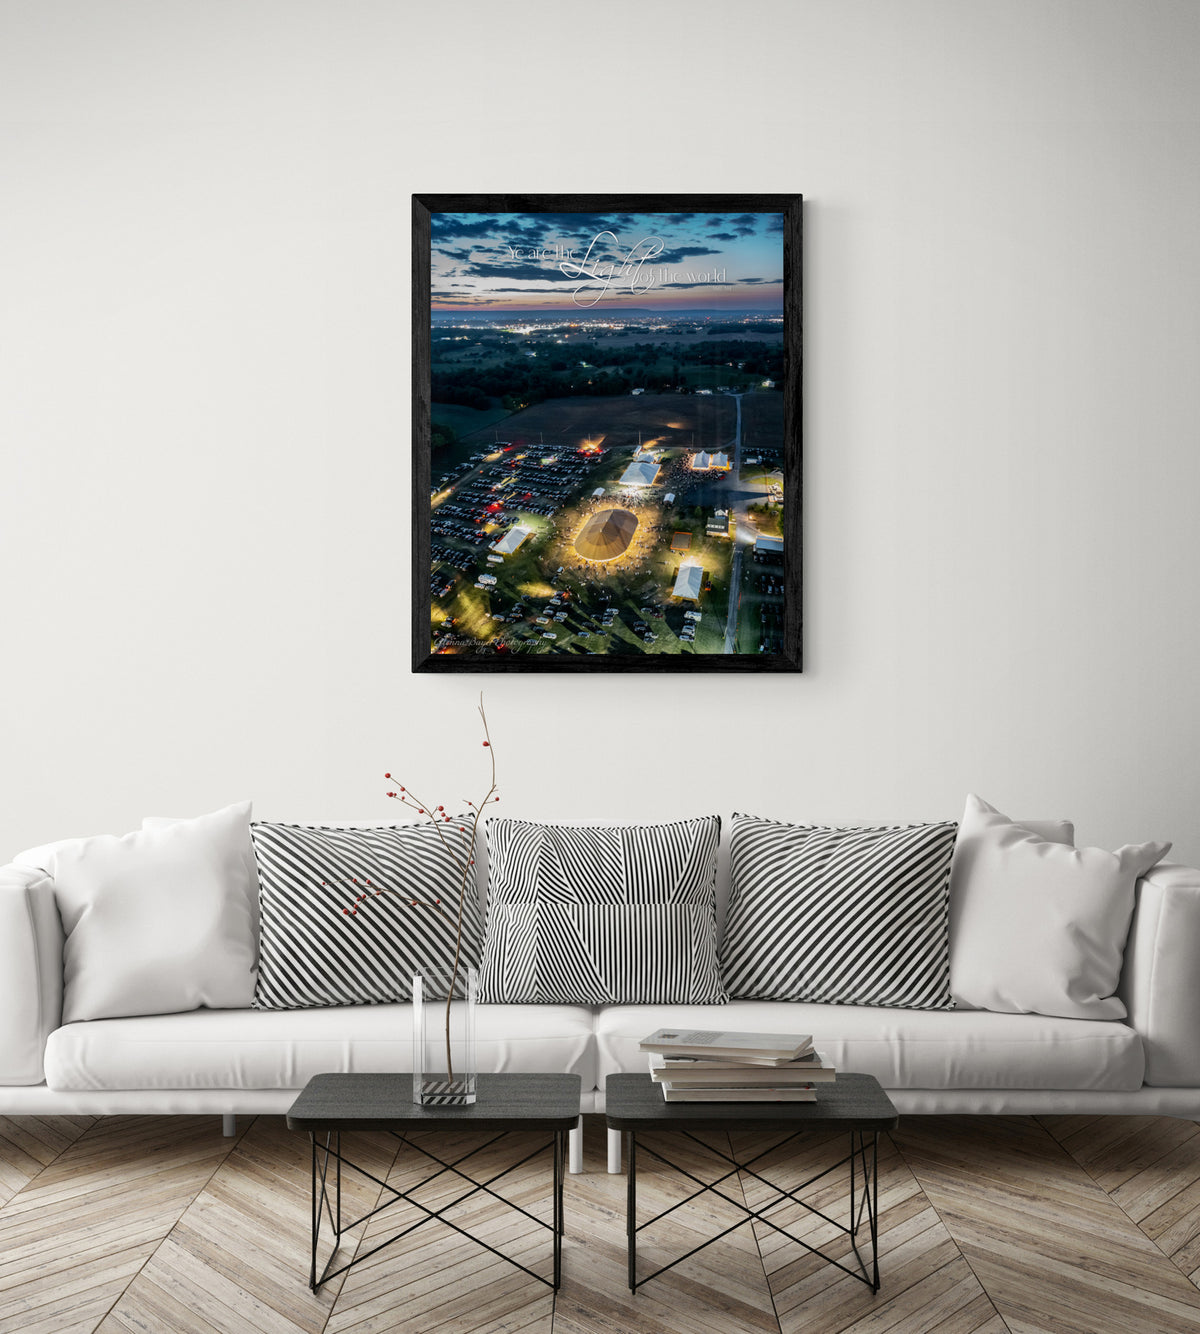  print displayed on wall in living room